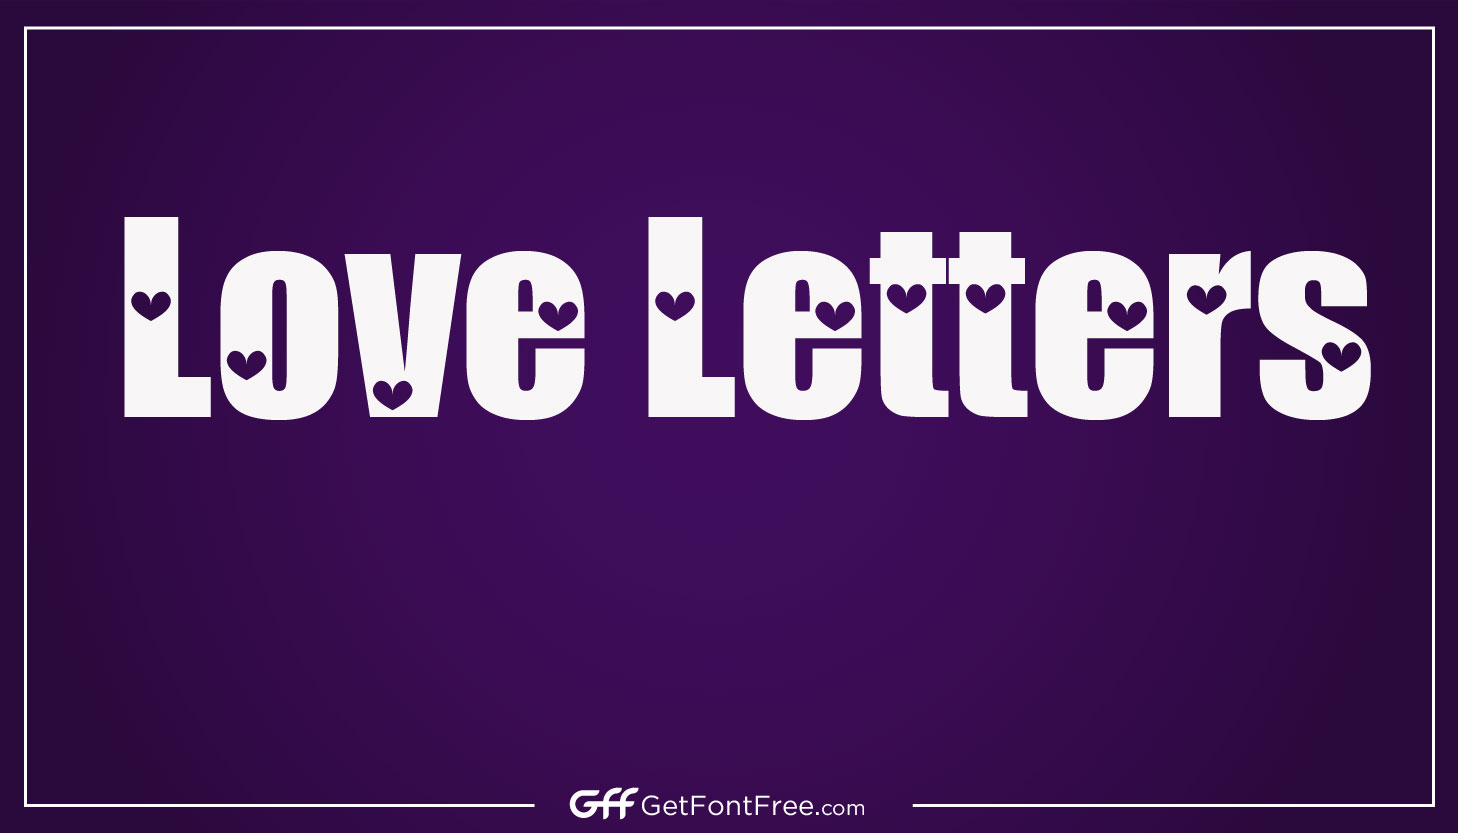 Love Letters Font is a unique and charming typeface that is inspired by vintage handwriting and lettering. It was designed by American graphic designer and lettering artist, Martina Flor, and released in 2014. The typeface is characterized by its elegant and flowing strokes, with irregular shapes that resemble handwritten letters. Love Letters is a popular choice for a wide range of design projects, including wedding invitations, greeting cards, and other romantic or sentimental designs. Its vintage and romantic style has made it a popular choice for designers who want to add a touch of nostalgia and warmth to their designs.